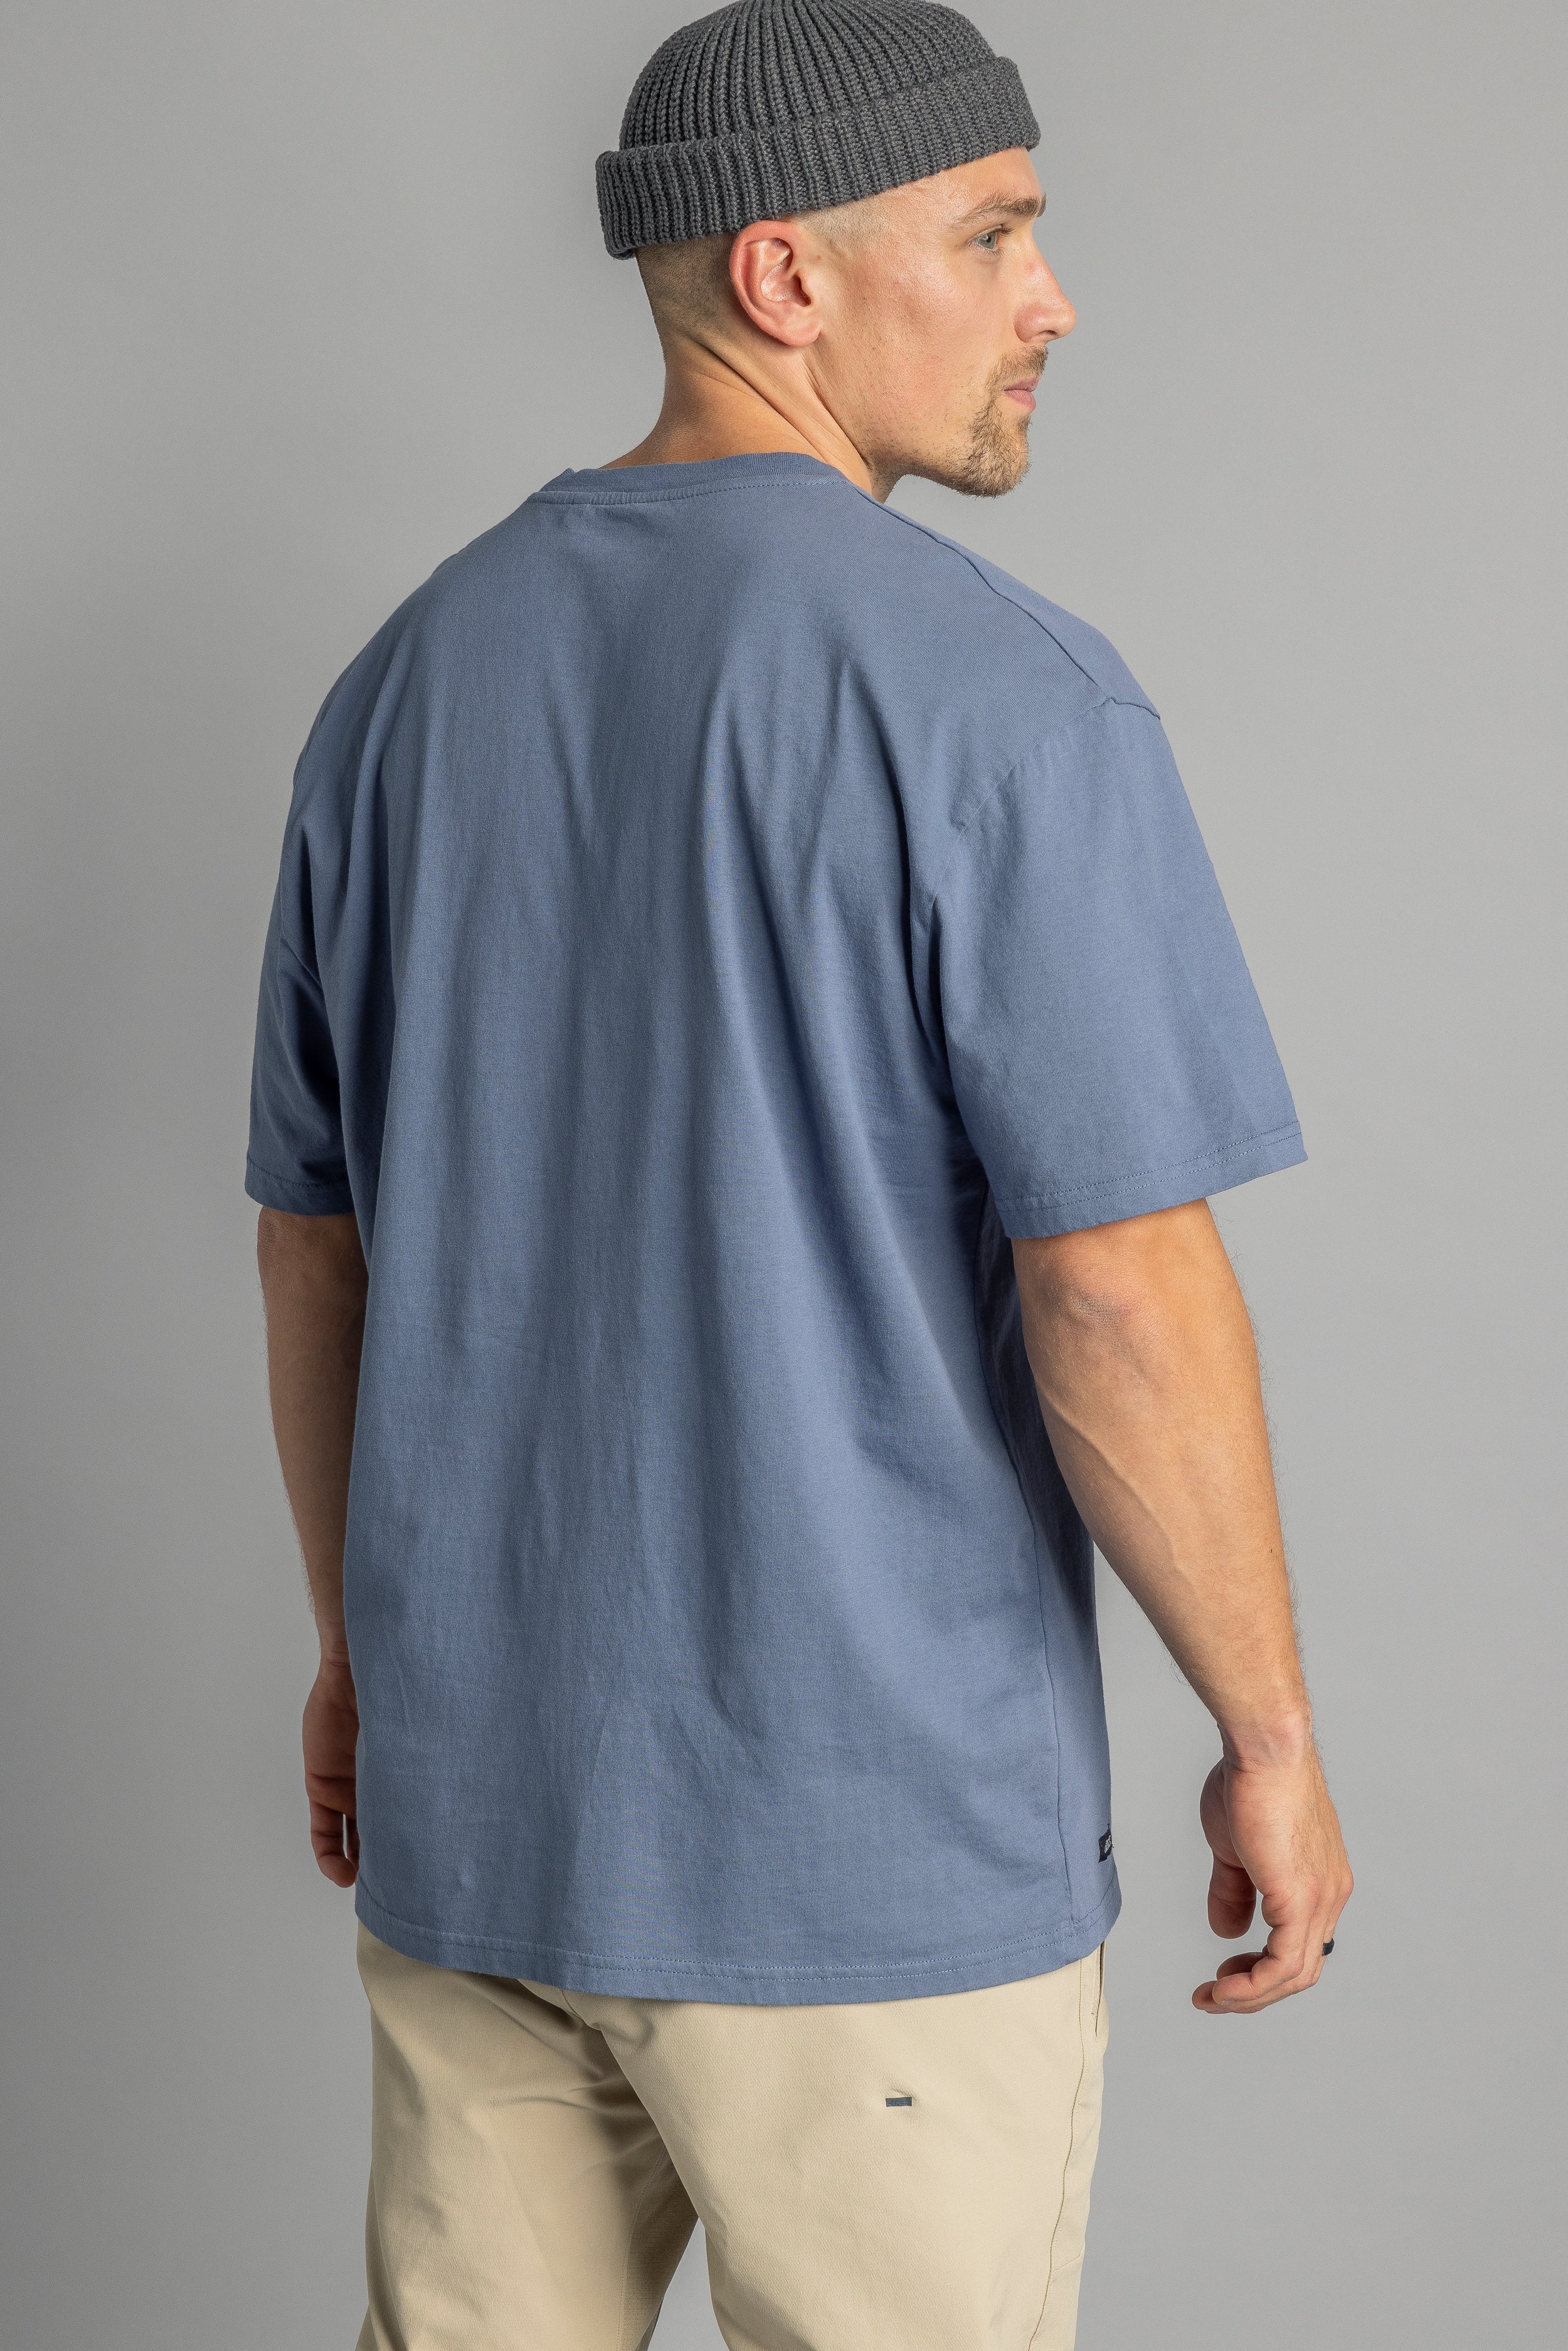 Blue oversized T-shirt made from recycled cotton by DIRTS